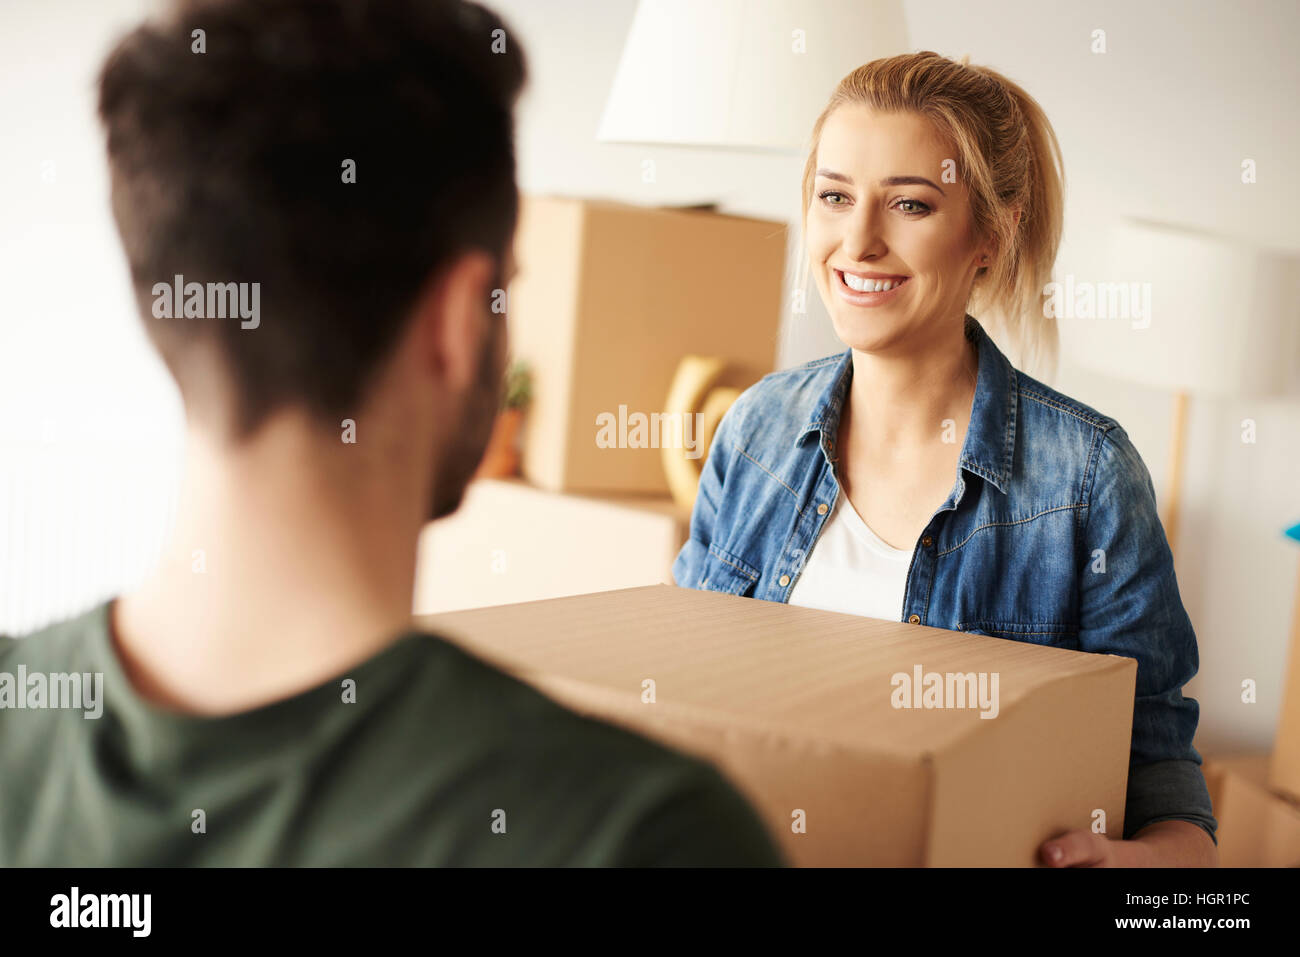 Woman passing cardboard box to her partner Stock Photo